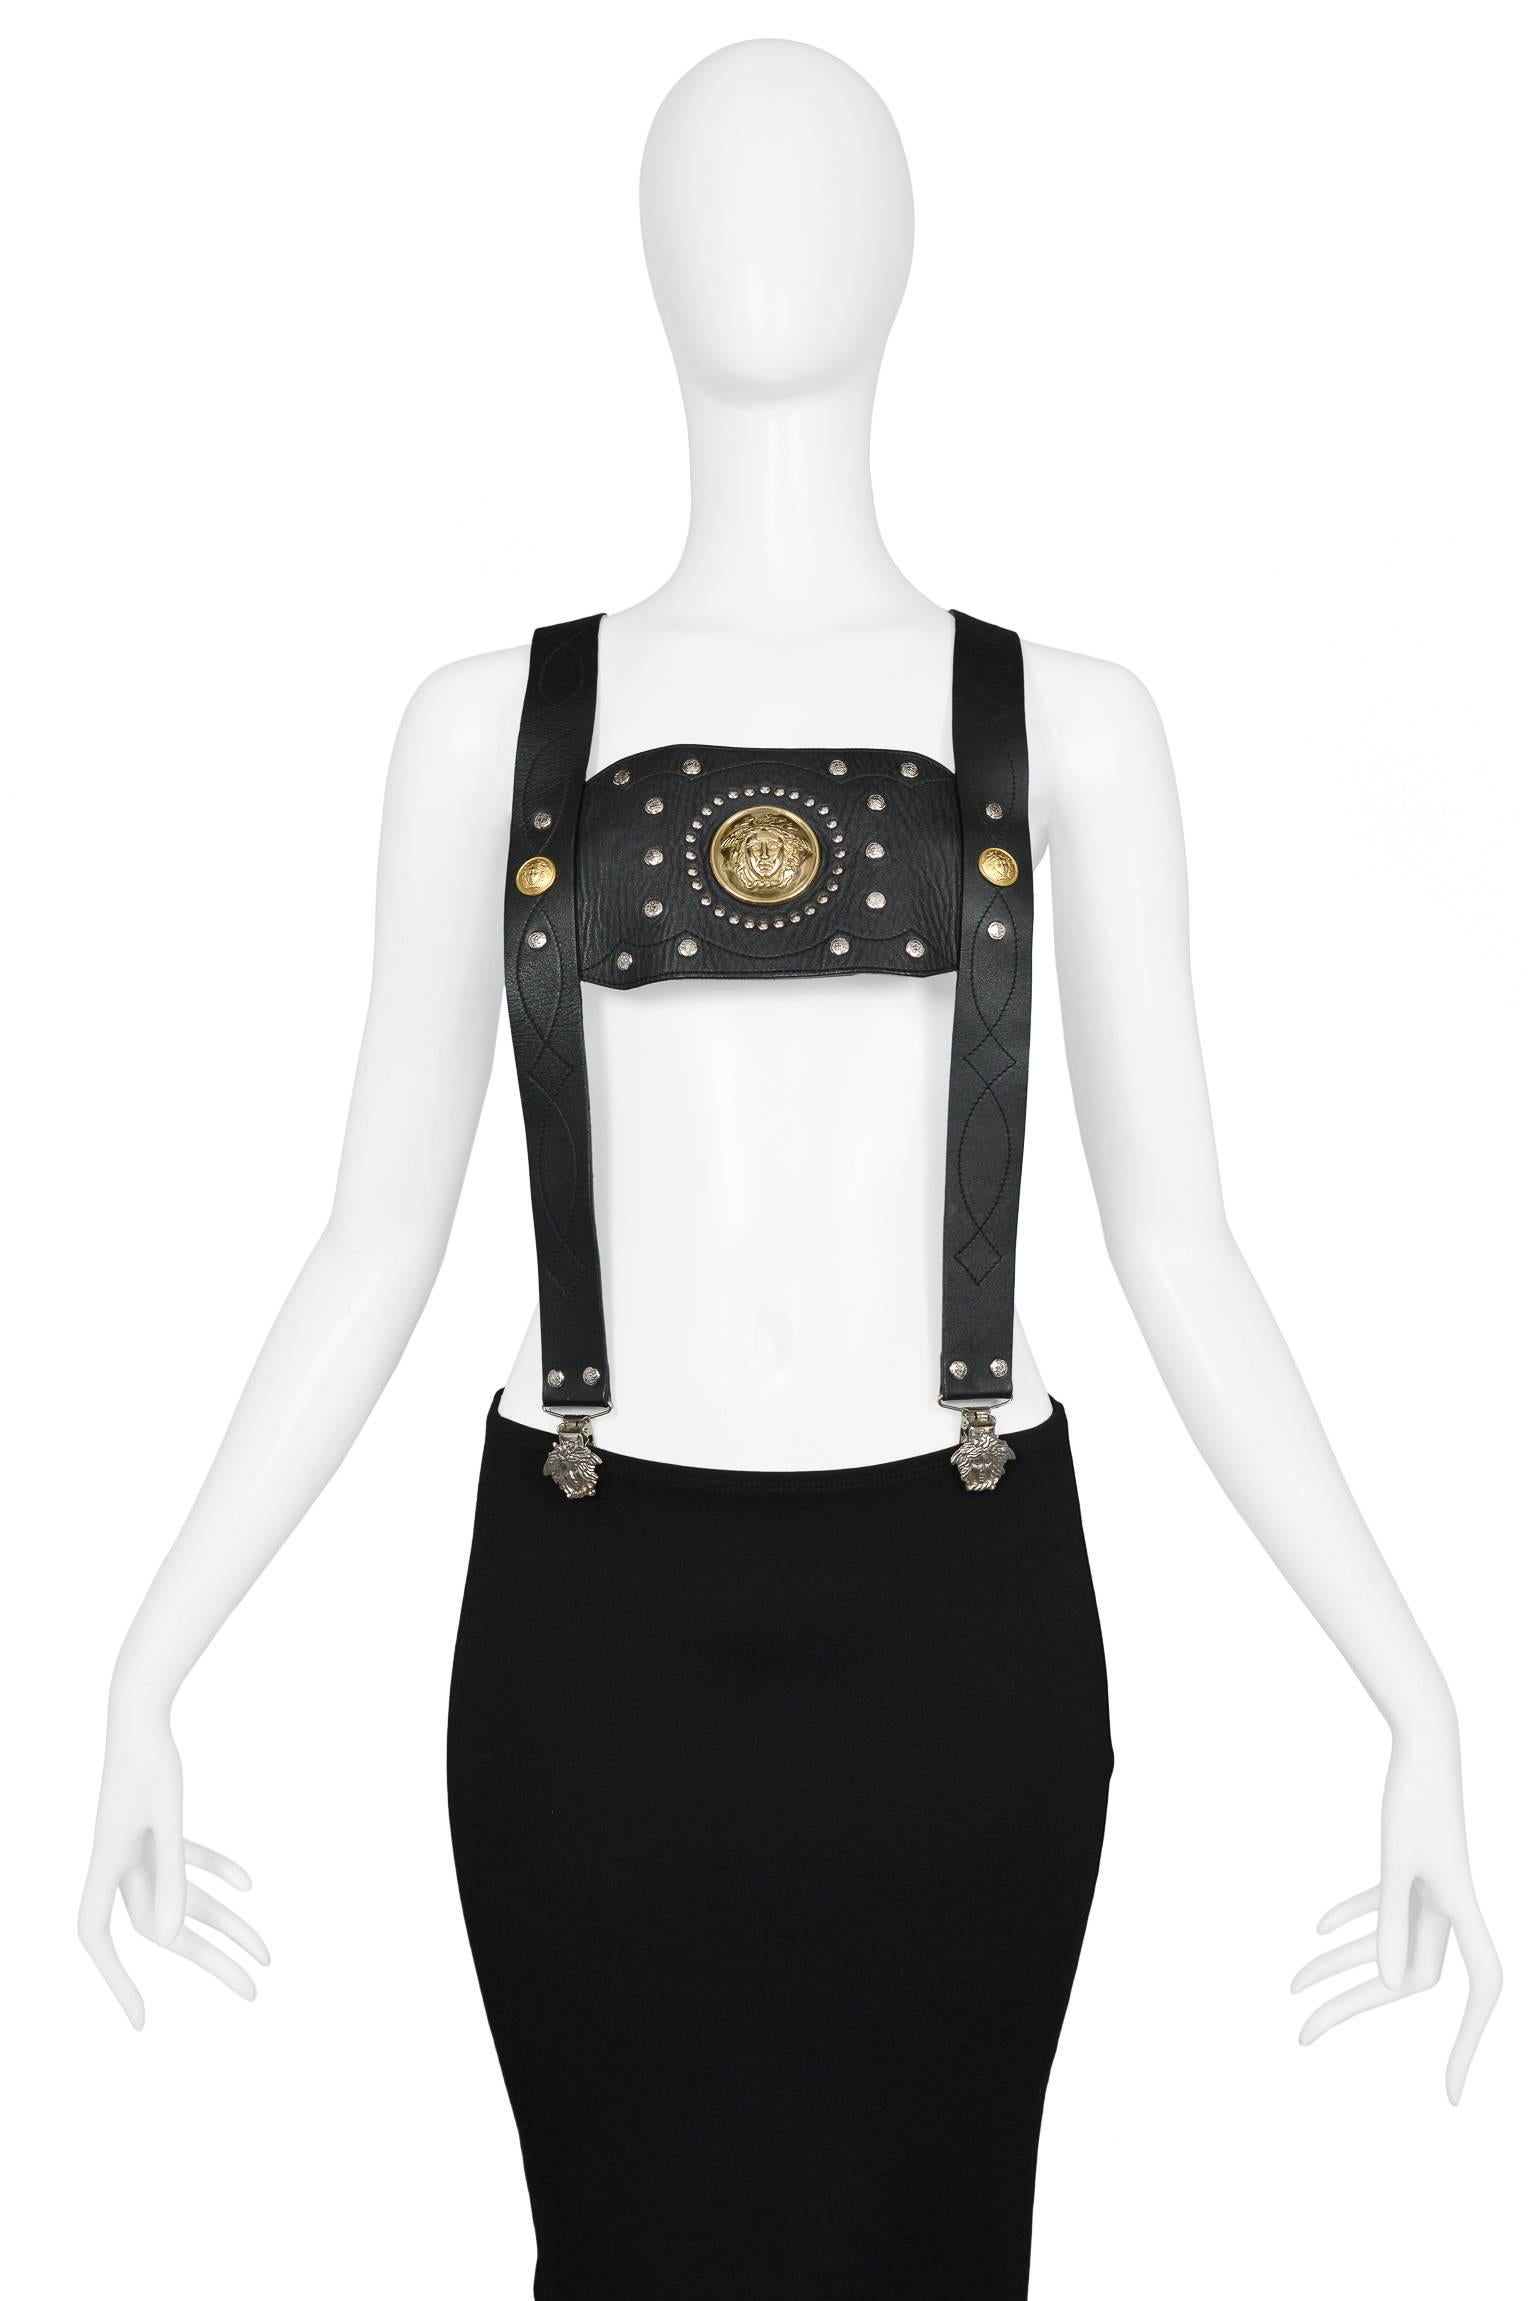 Super rare and unusual Gianni Versace black leather suspenders with gold tone studs and Medusa emblems. Suspenders feature decorative black stitching and silver Medusa clips. Back of suspenders have an elastic band with white Medusa head graphic.